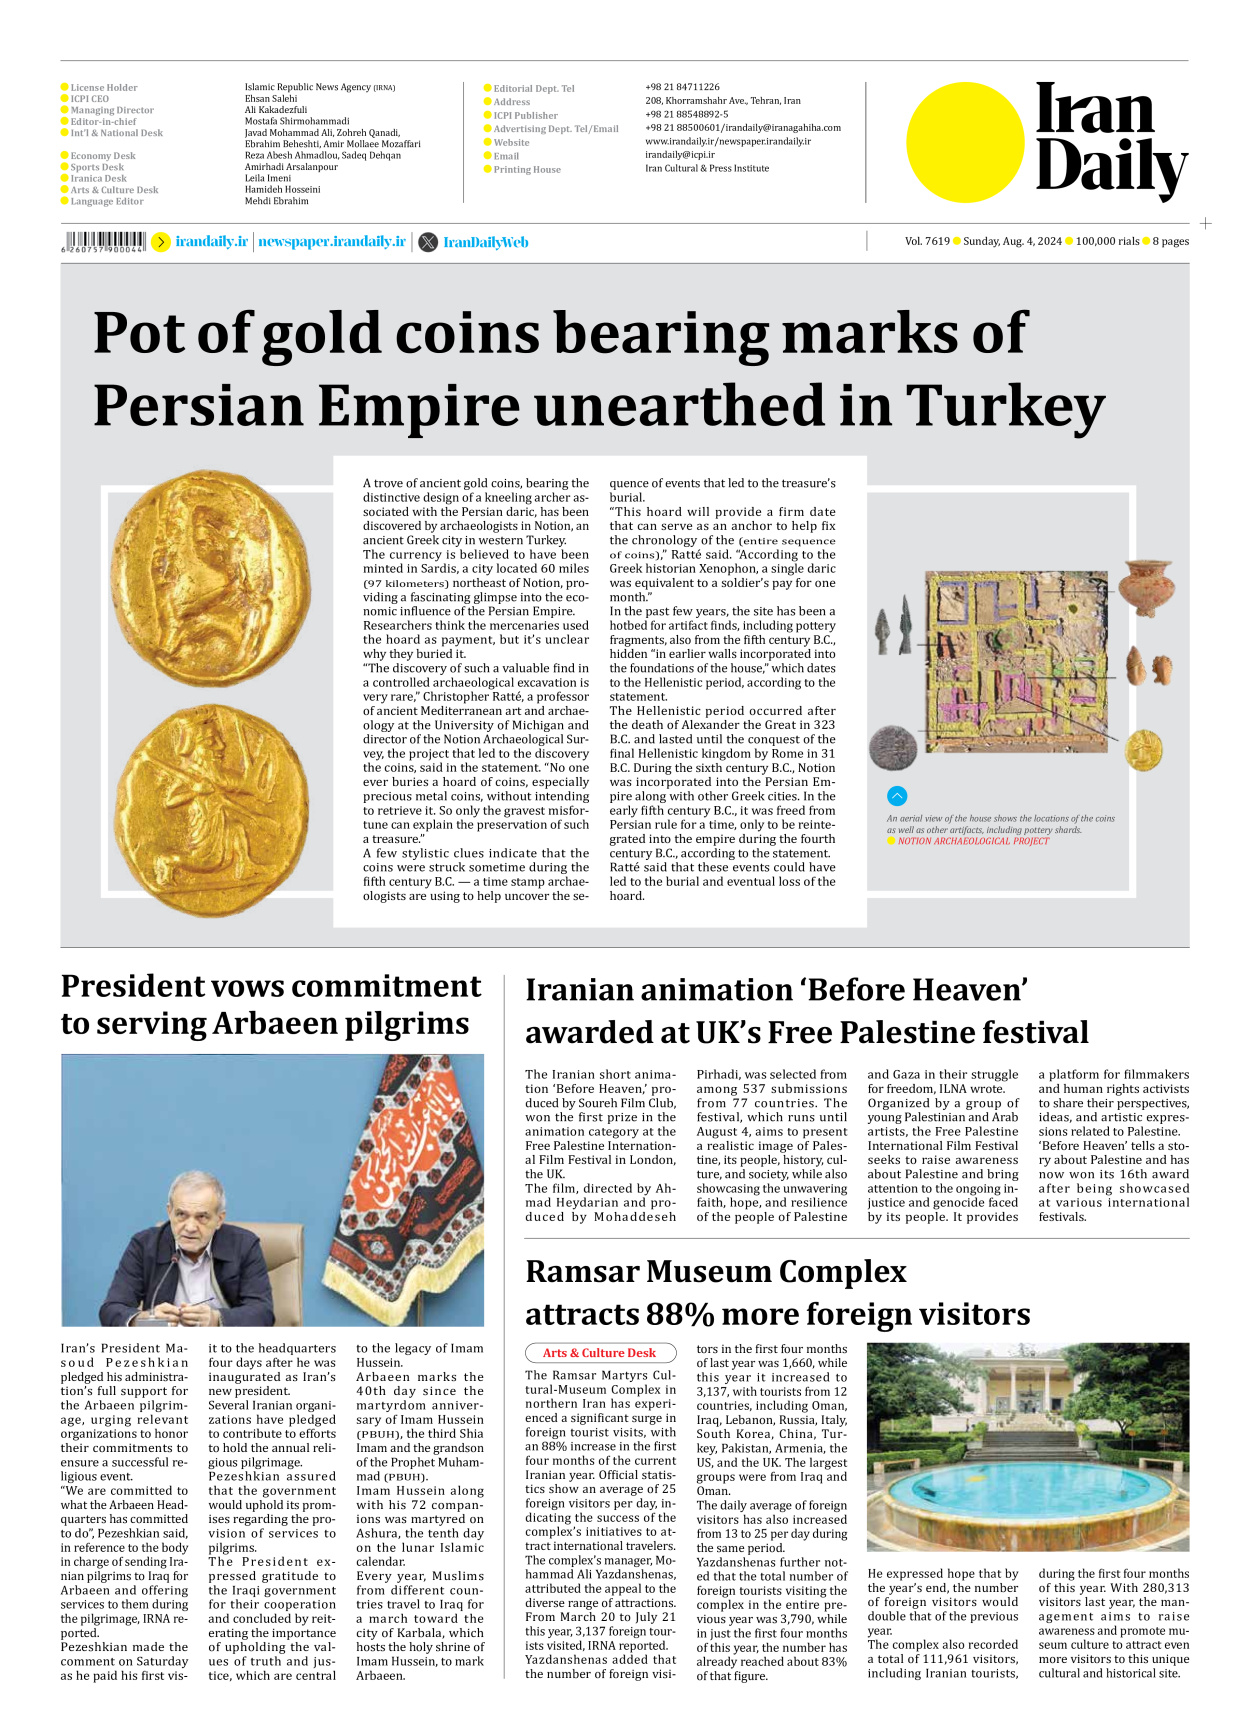 Iran Daily - Number Seven Thousand Six Hundred and Nineteen - 04 August 2024 - Page 8